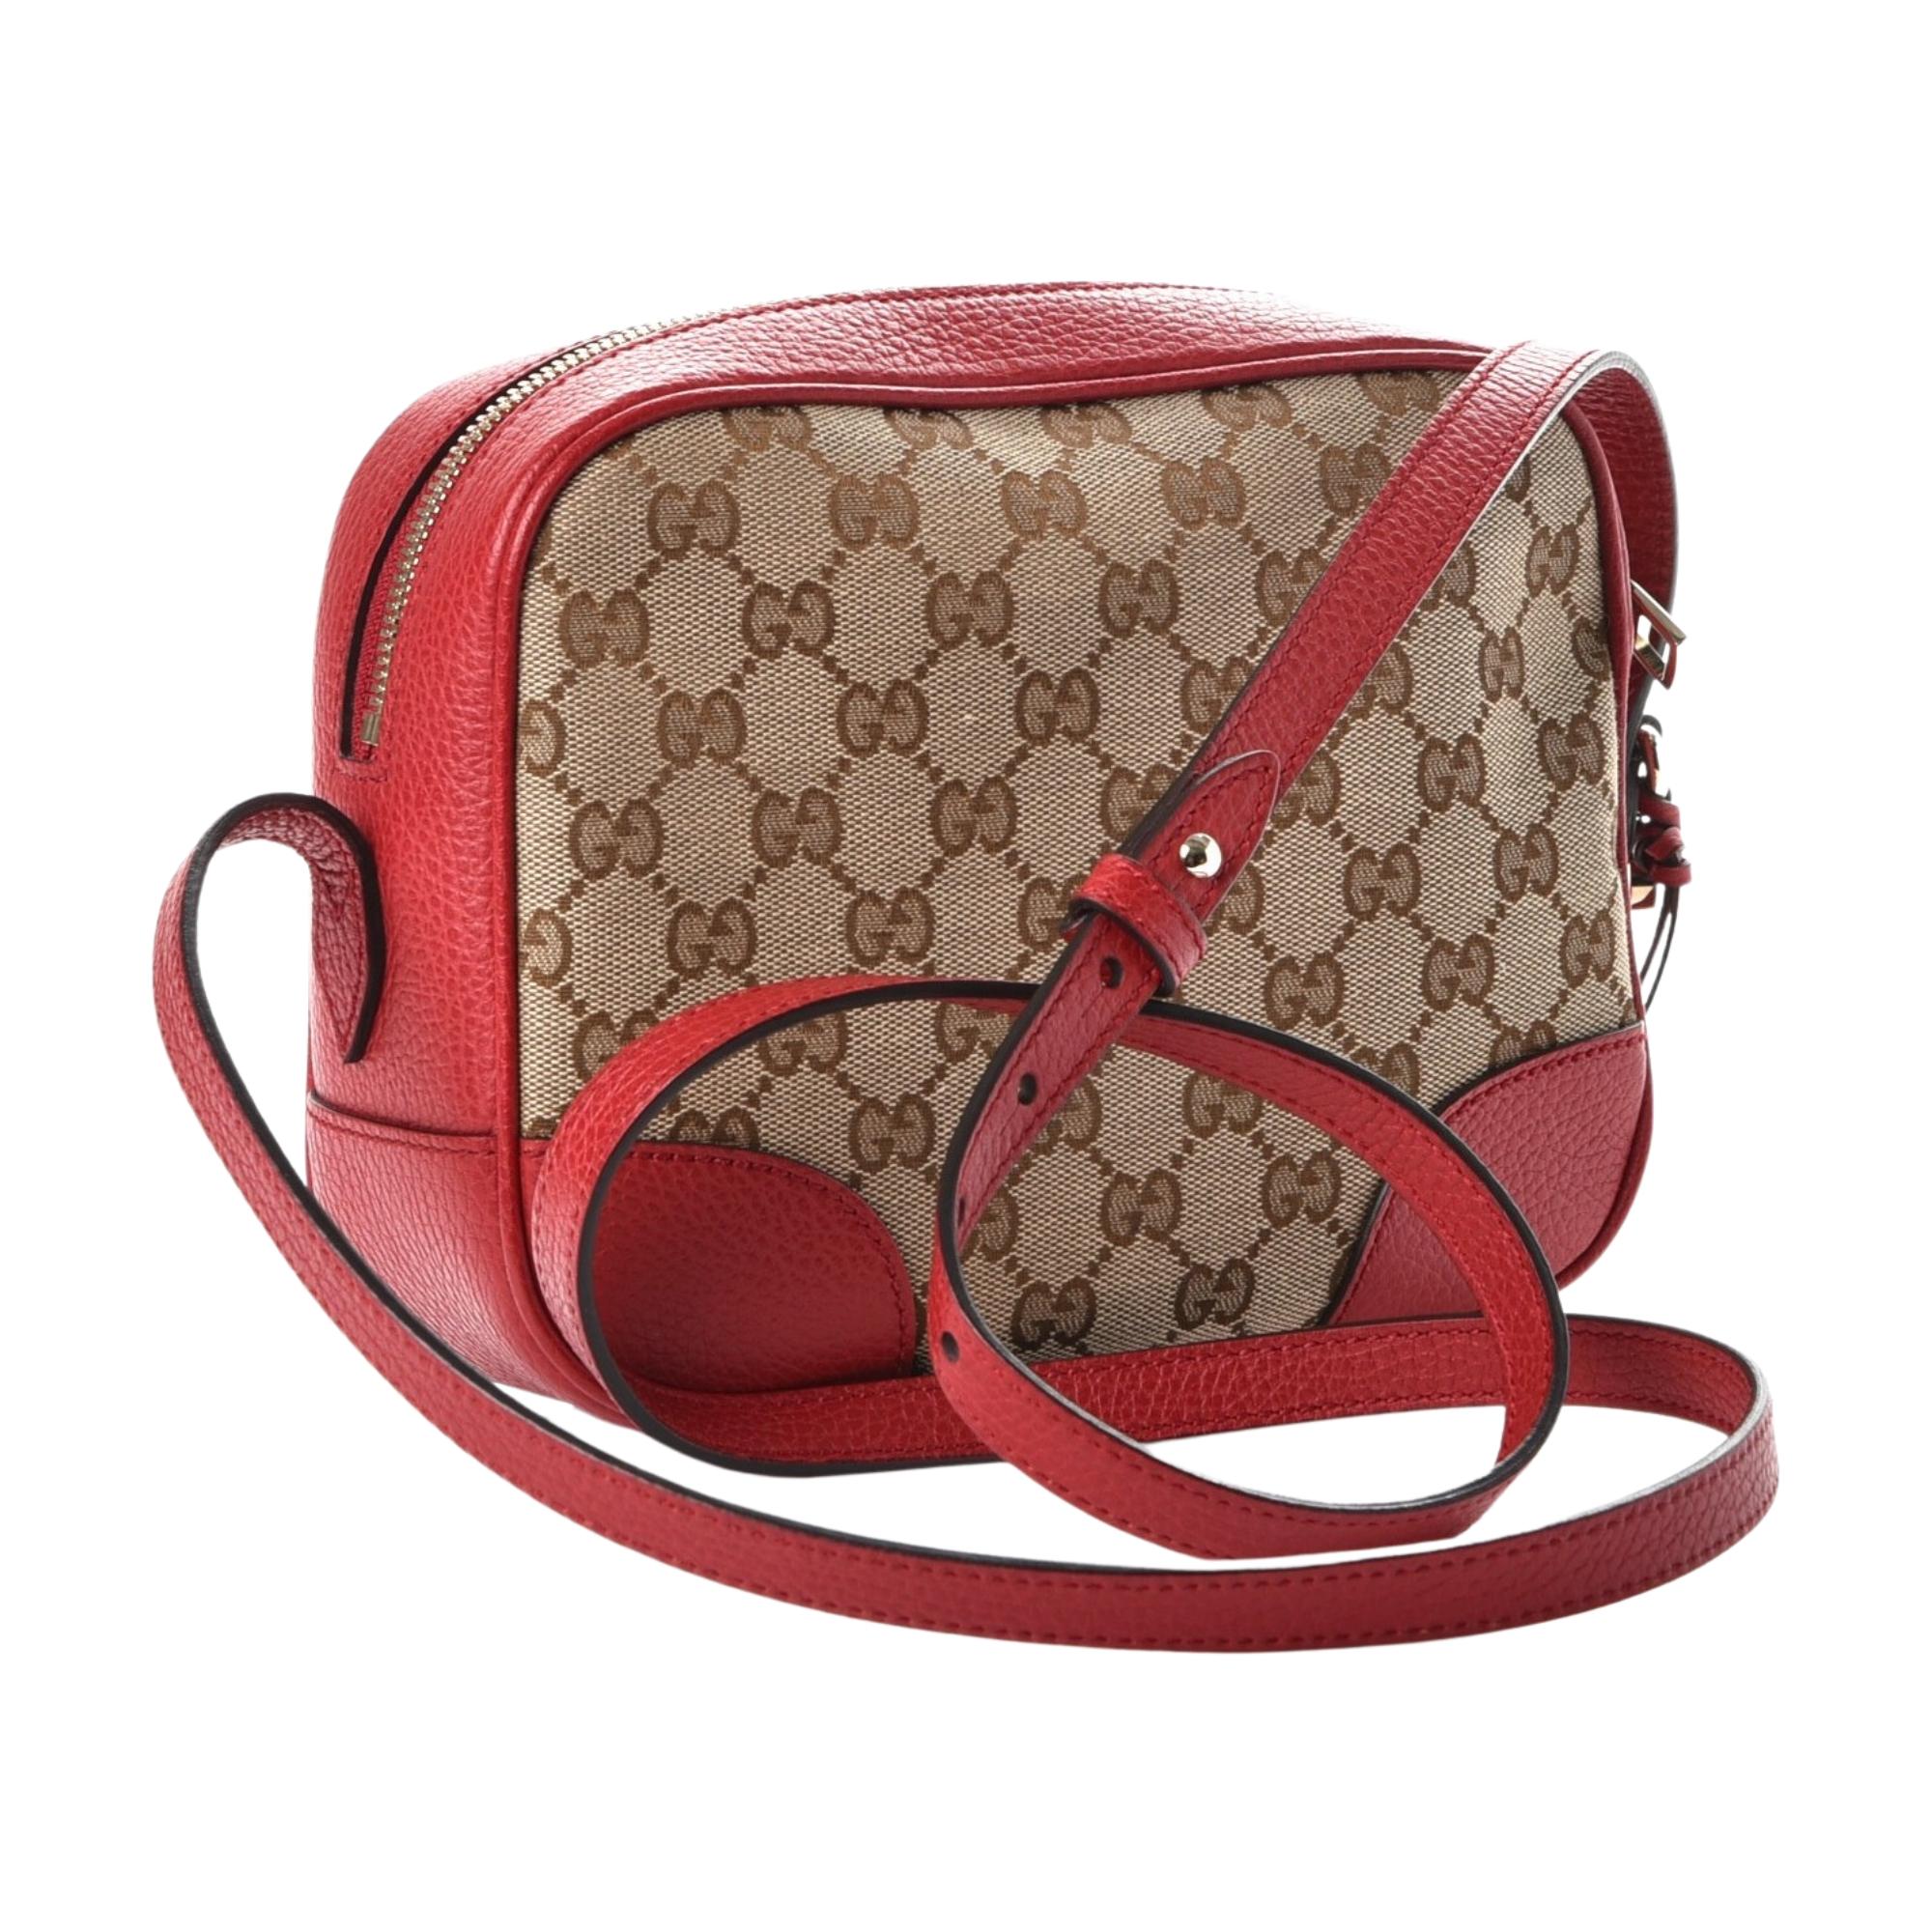 This Gucci cross-body bag is made of the original brown and beige monogram with red leather finishes. The bag features a leather shoulder strap with a light gold adjustment knobs and a decorative leather tie with a small, light gold interlocking GG